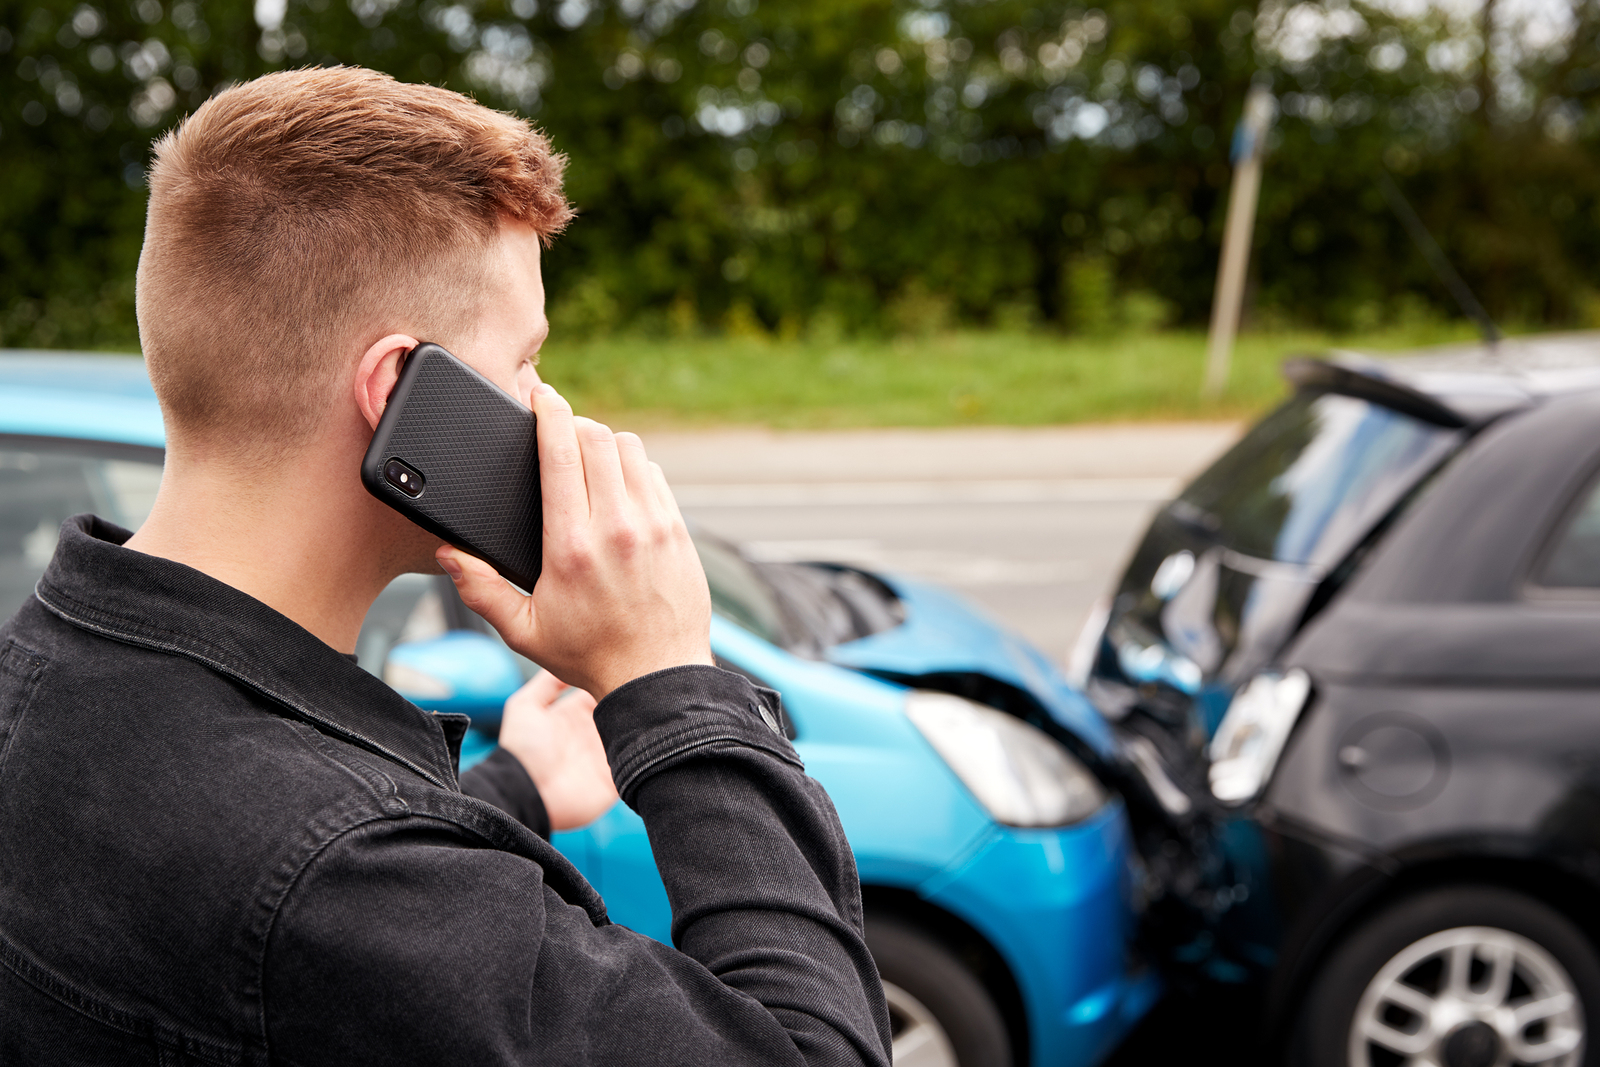 driver in car accident - Minnesota car accident attorney - Sand Law LLC